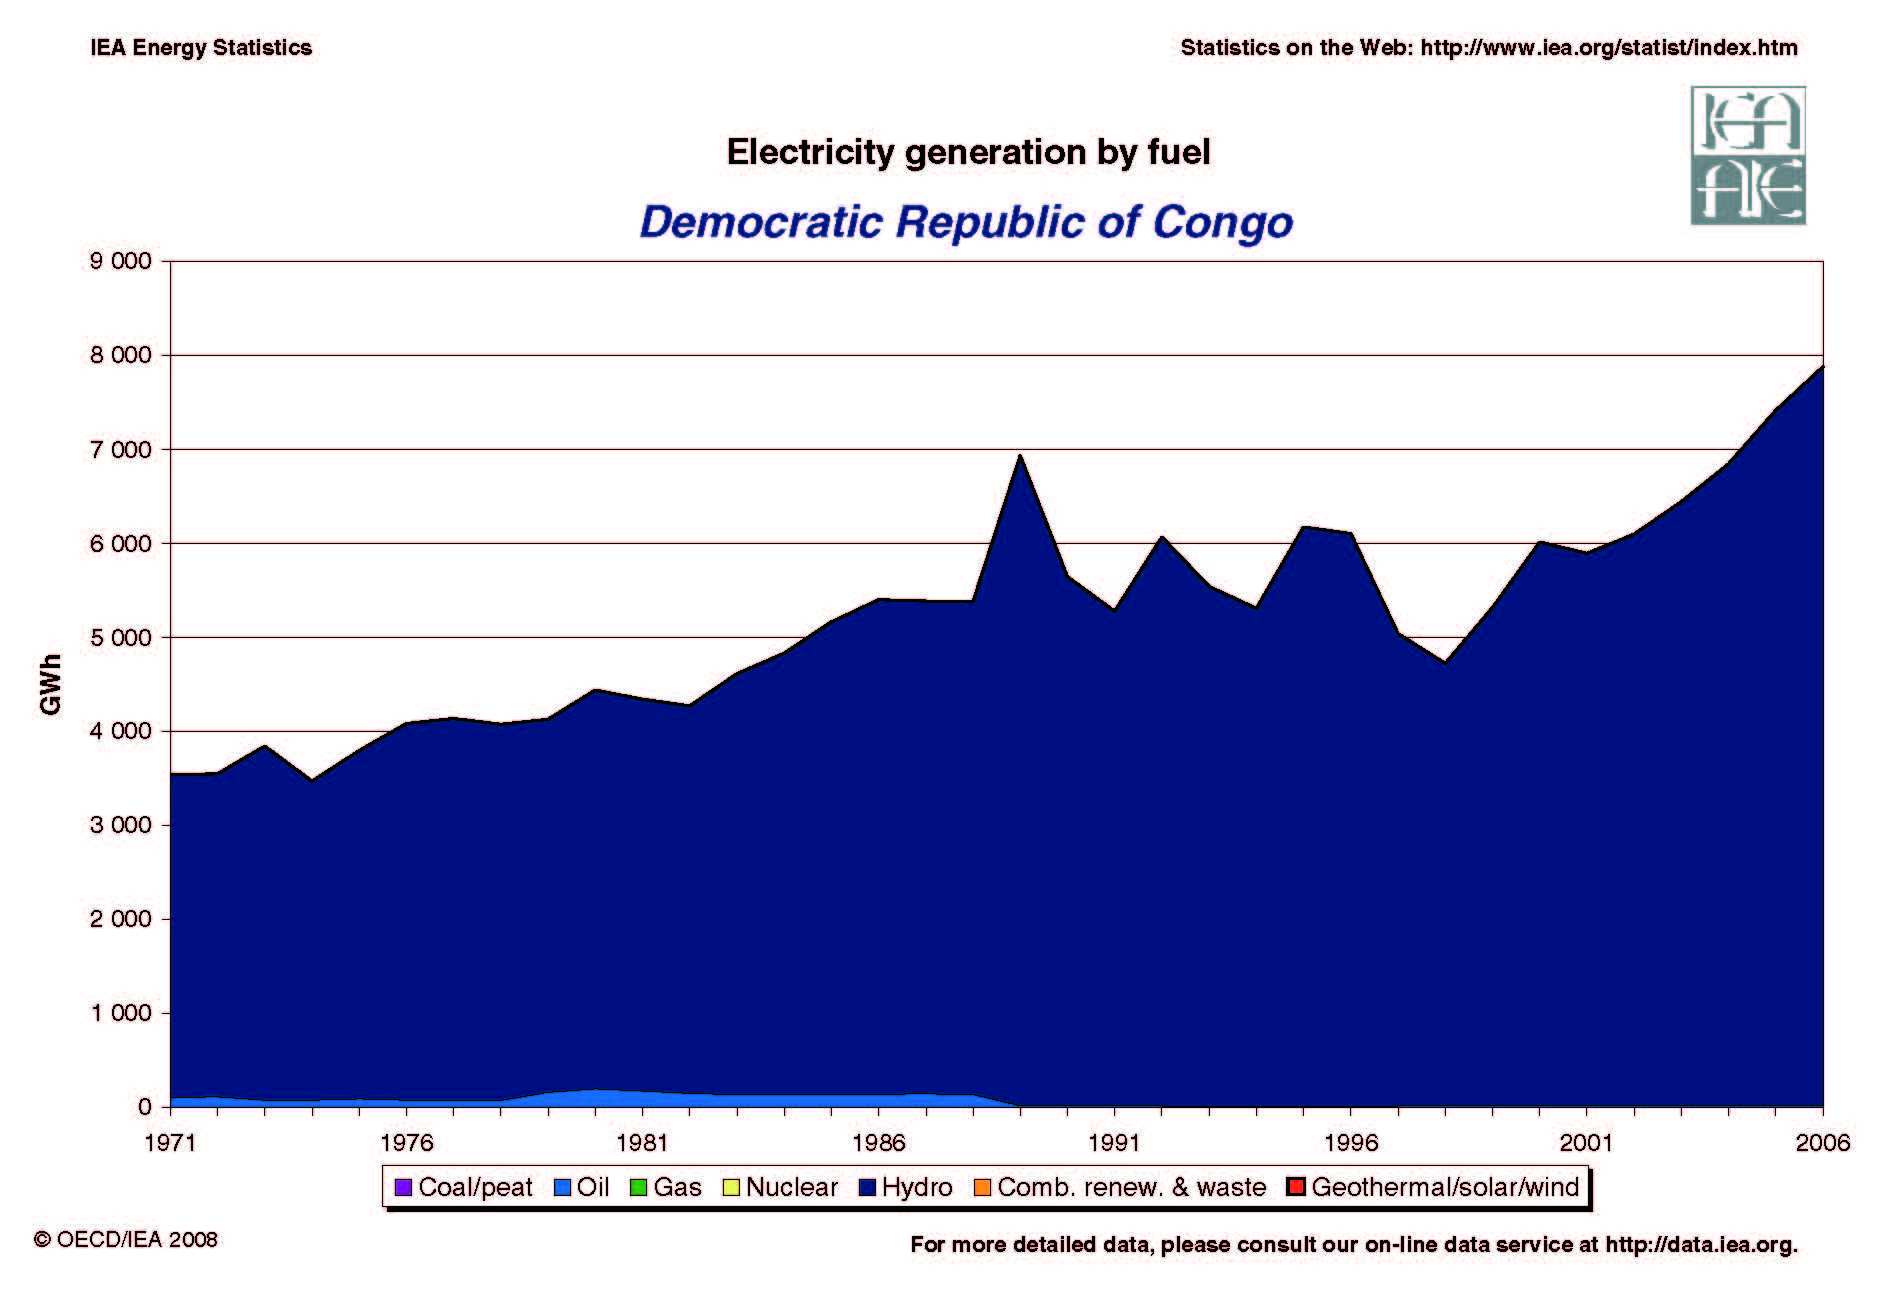 Electricity generation by fuel - Dem. Rep. of Congo